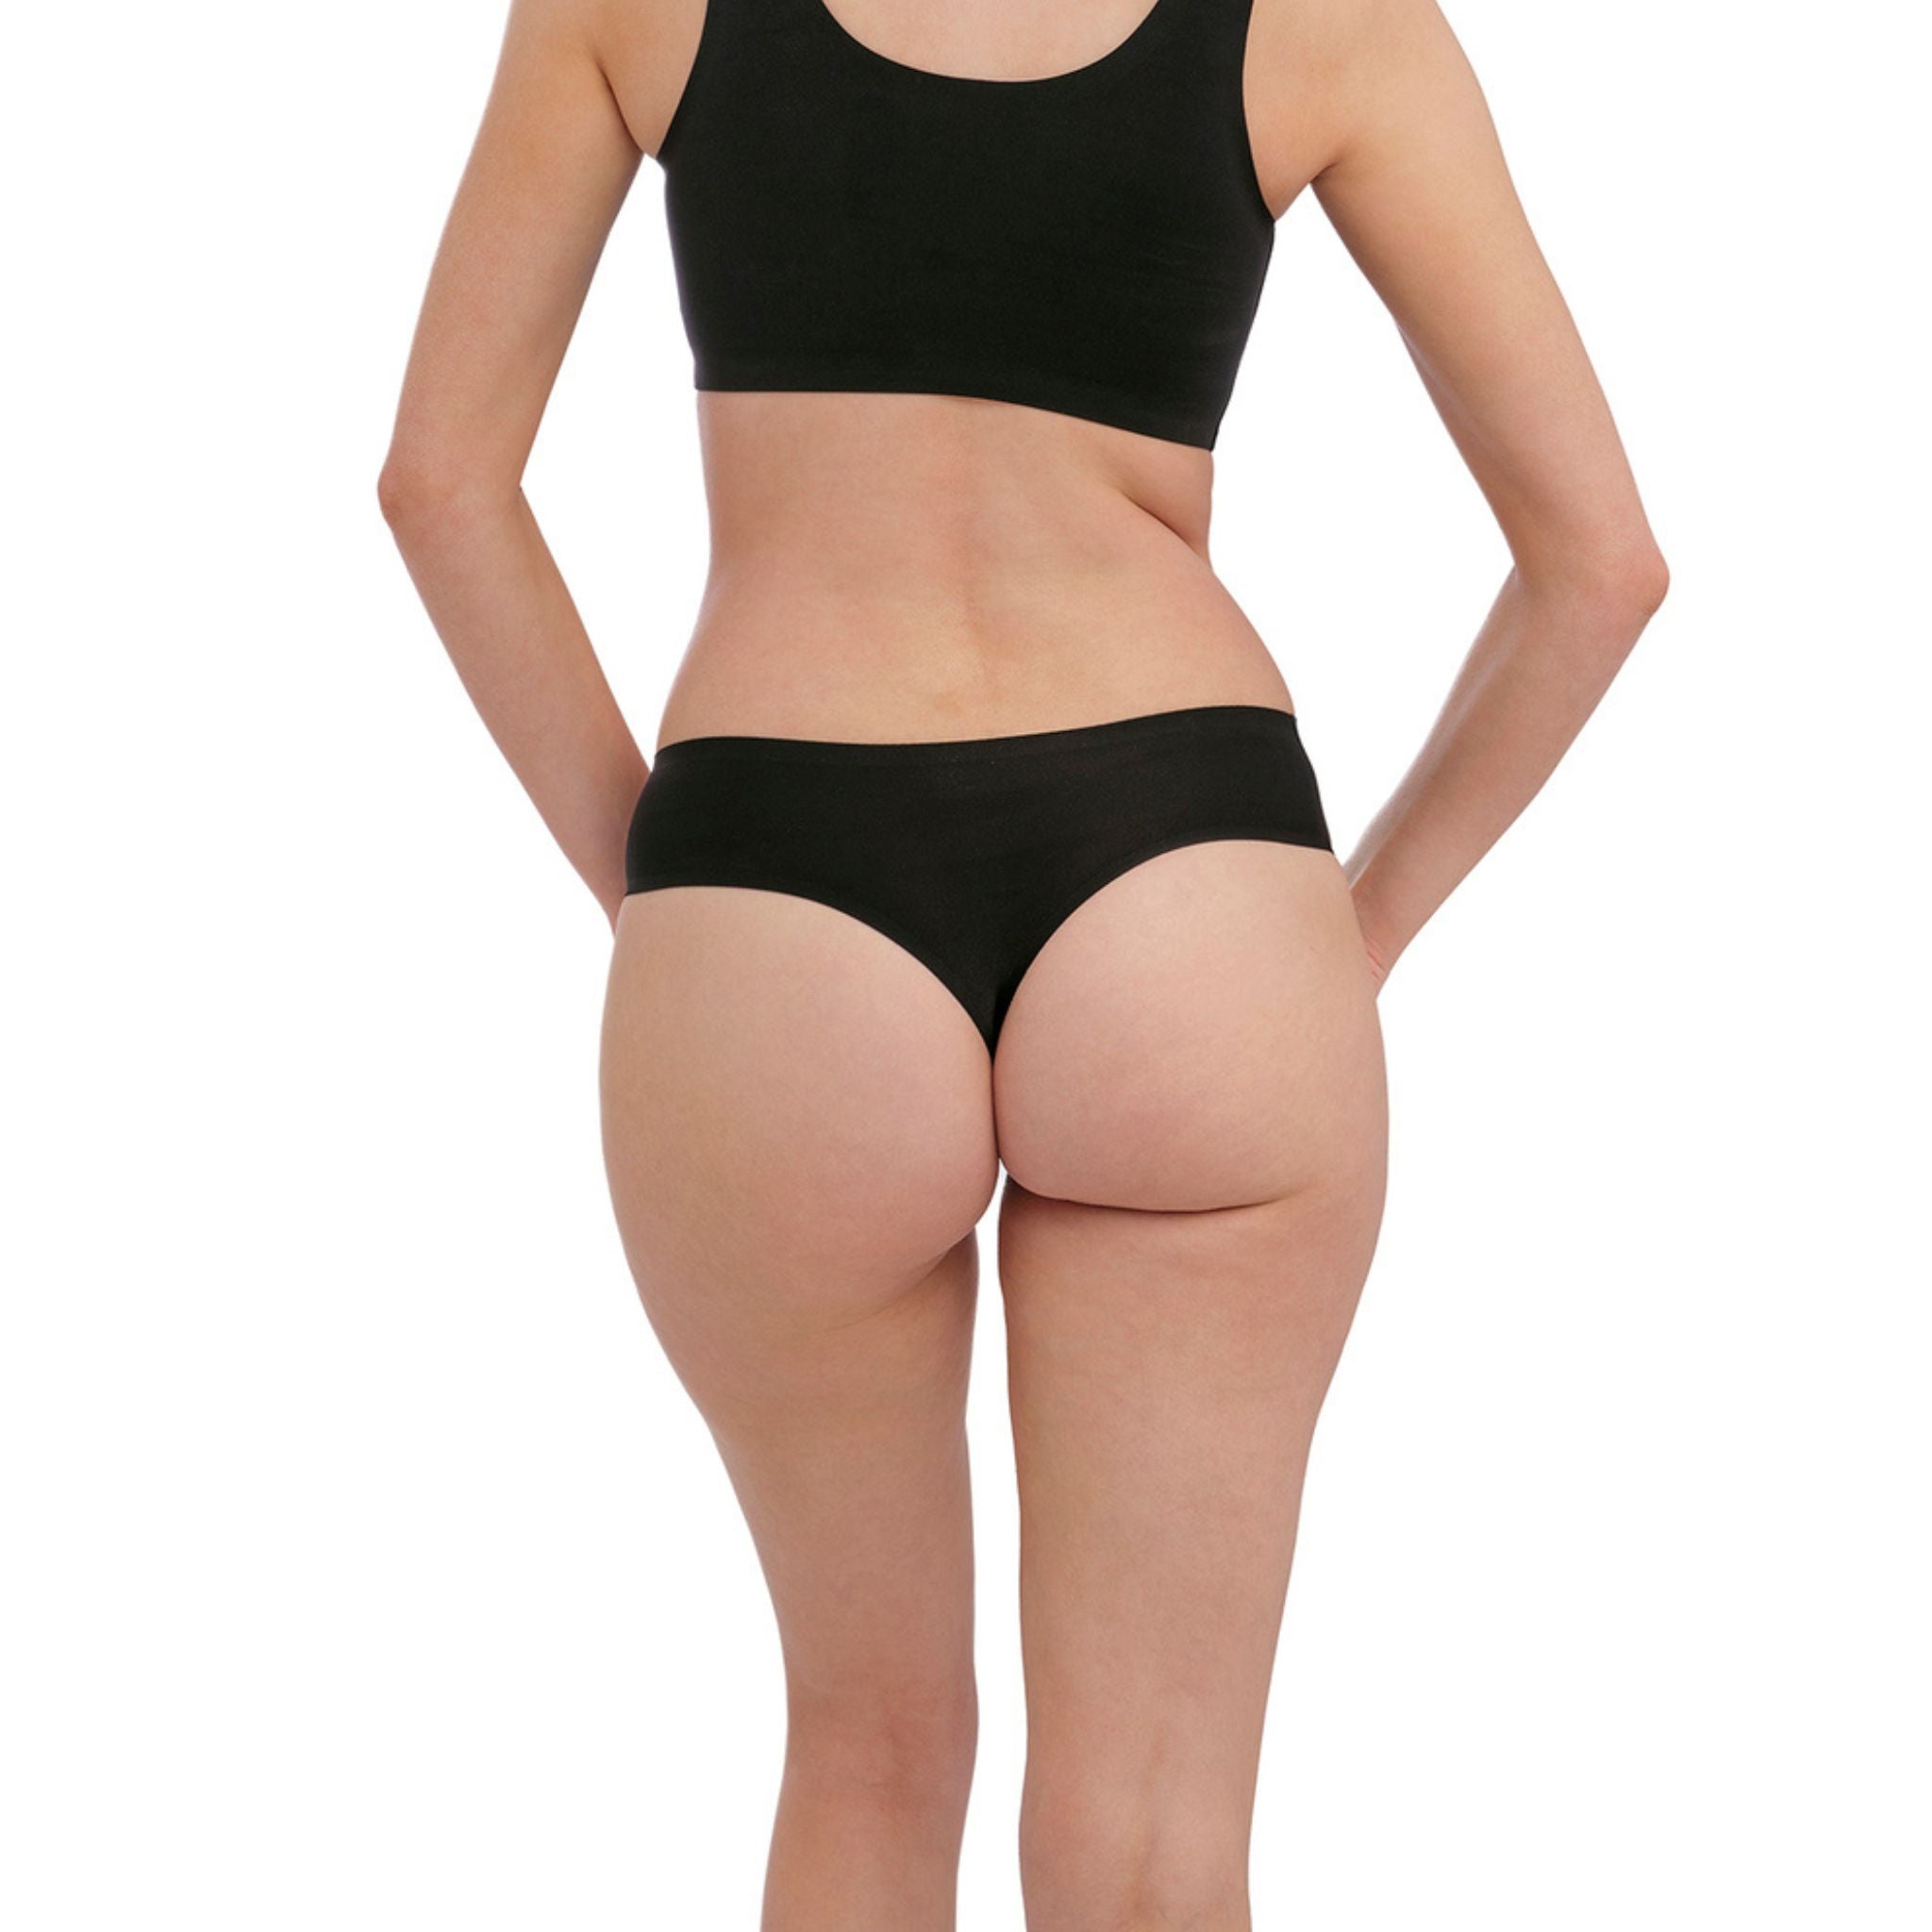 The classic thong shape of Fantasie's must-have Invisible Stretch Thong offers a low back coverage and complete comfort with super soft, stitch free fabric, providing a smooth second skin finish under clothing. Available in one size that fits XS - XL.  Classic thong shape  Soft handle fabric for a smooth second skin feel  Clean cut and stitch free with bonded seams and gusset for a complete no VPL finish  One size fits XS - XL